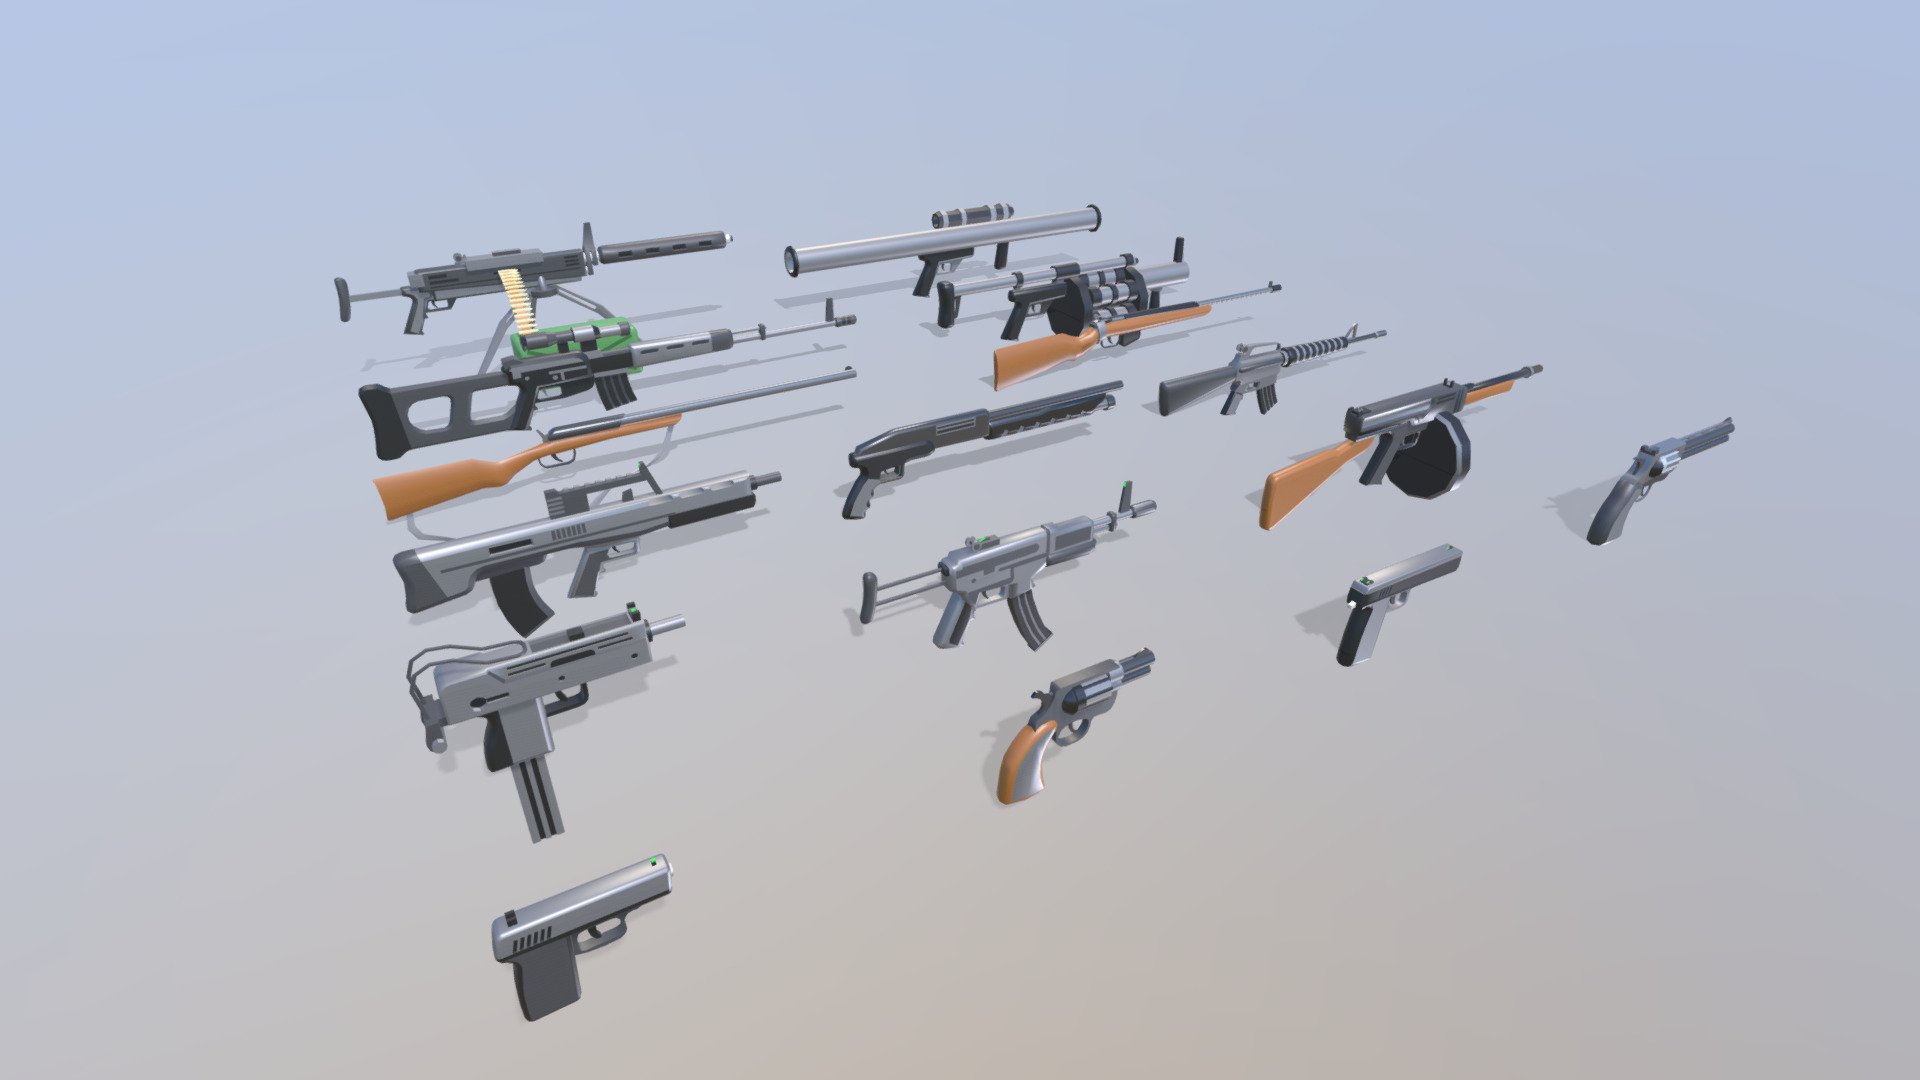 This package includes 16 guns models.
Accurate forms of polygonal shapes, give this model more simplicity and elegance.
Models created in Blender software.
Vertices:
Bazooka: 564
BK57: 775
Grenade Launcher: 1356
Hunting 01: 428
Hunting 02: 568
M16: 1165
Machine: 2524
Magnum: 564
MP5: 1045
Pistol: 418
Revolver: 496
Shotgun: 743
Sniper: 1175
Thompson: 673
Uzi: 774
** Average Polygon is 722 ** - Low Poly Guns Models - Buy Royalty Free 3D model by okaro.ir 3d model